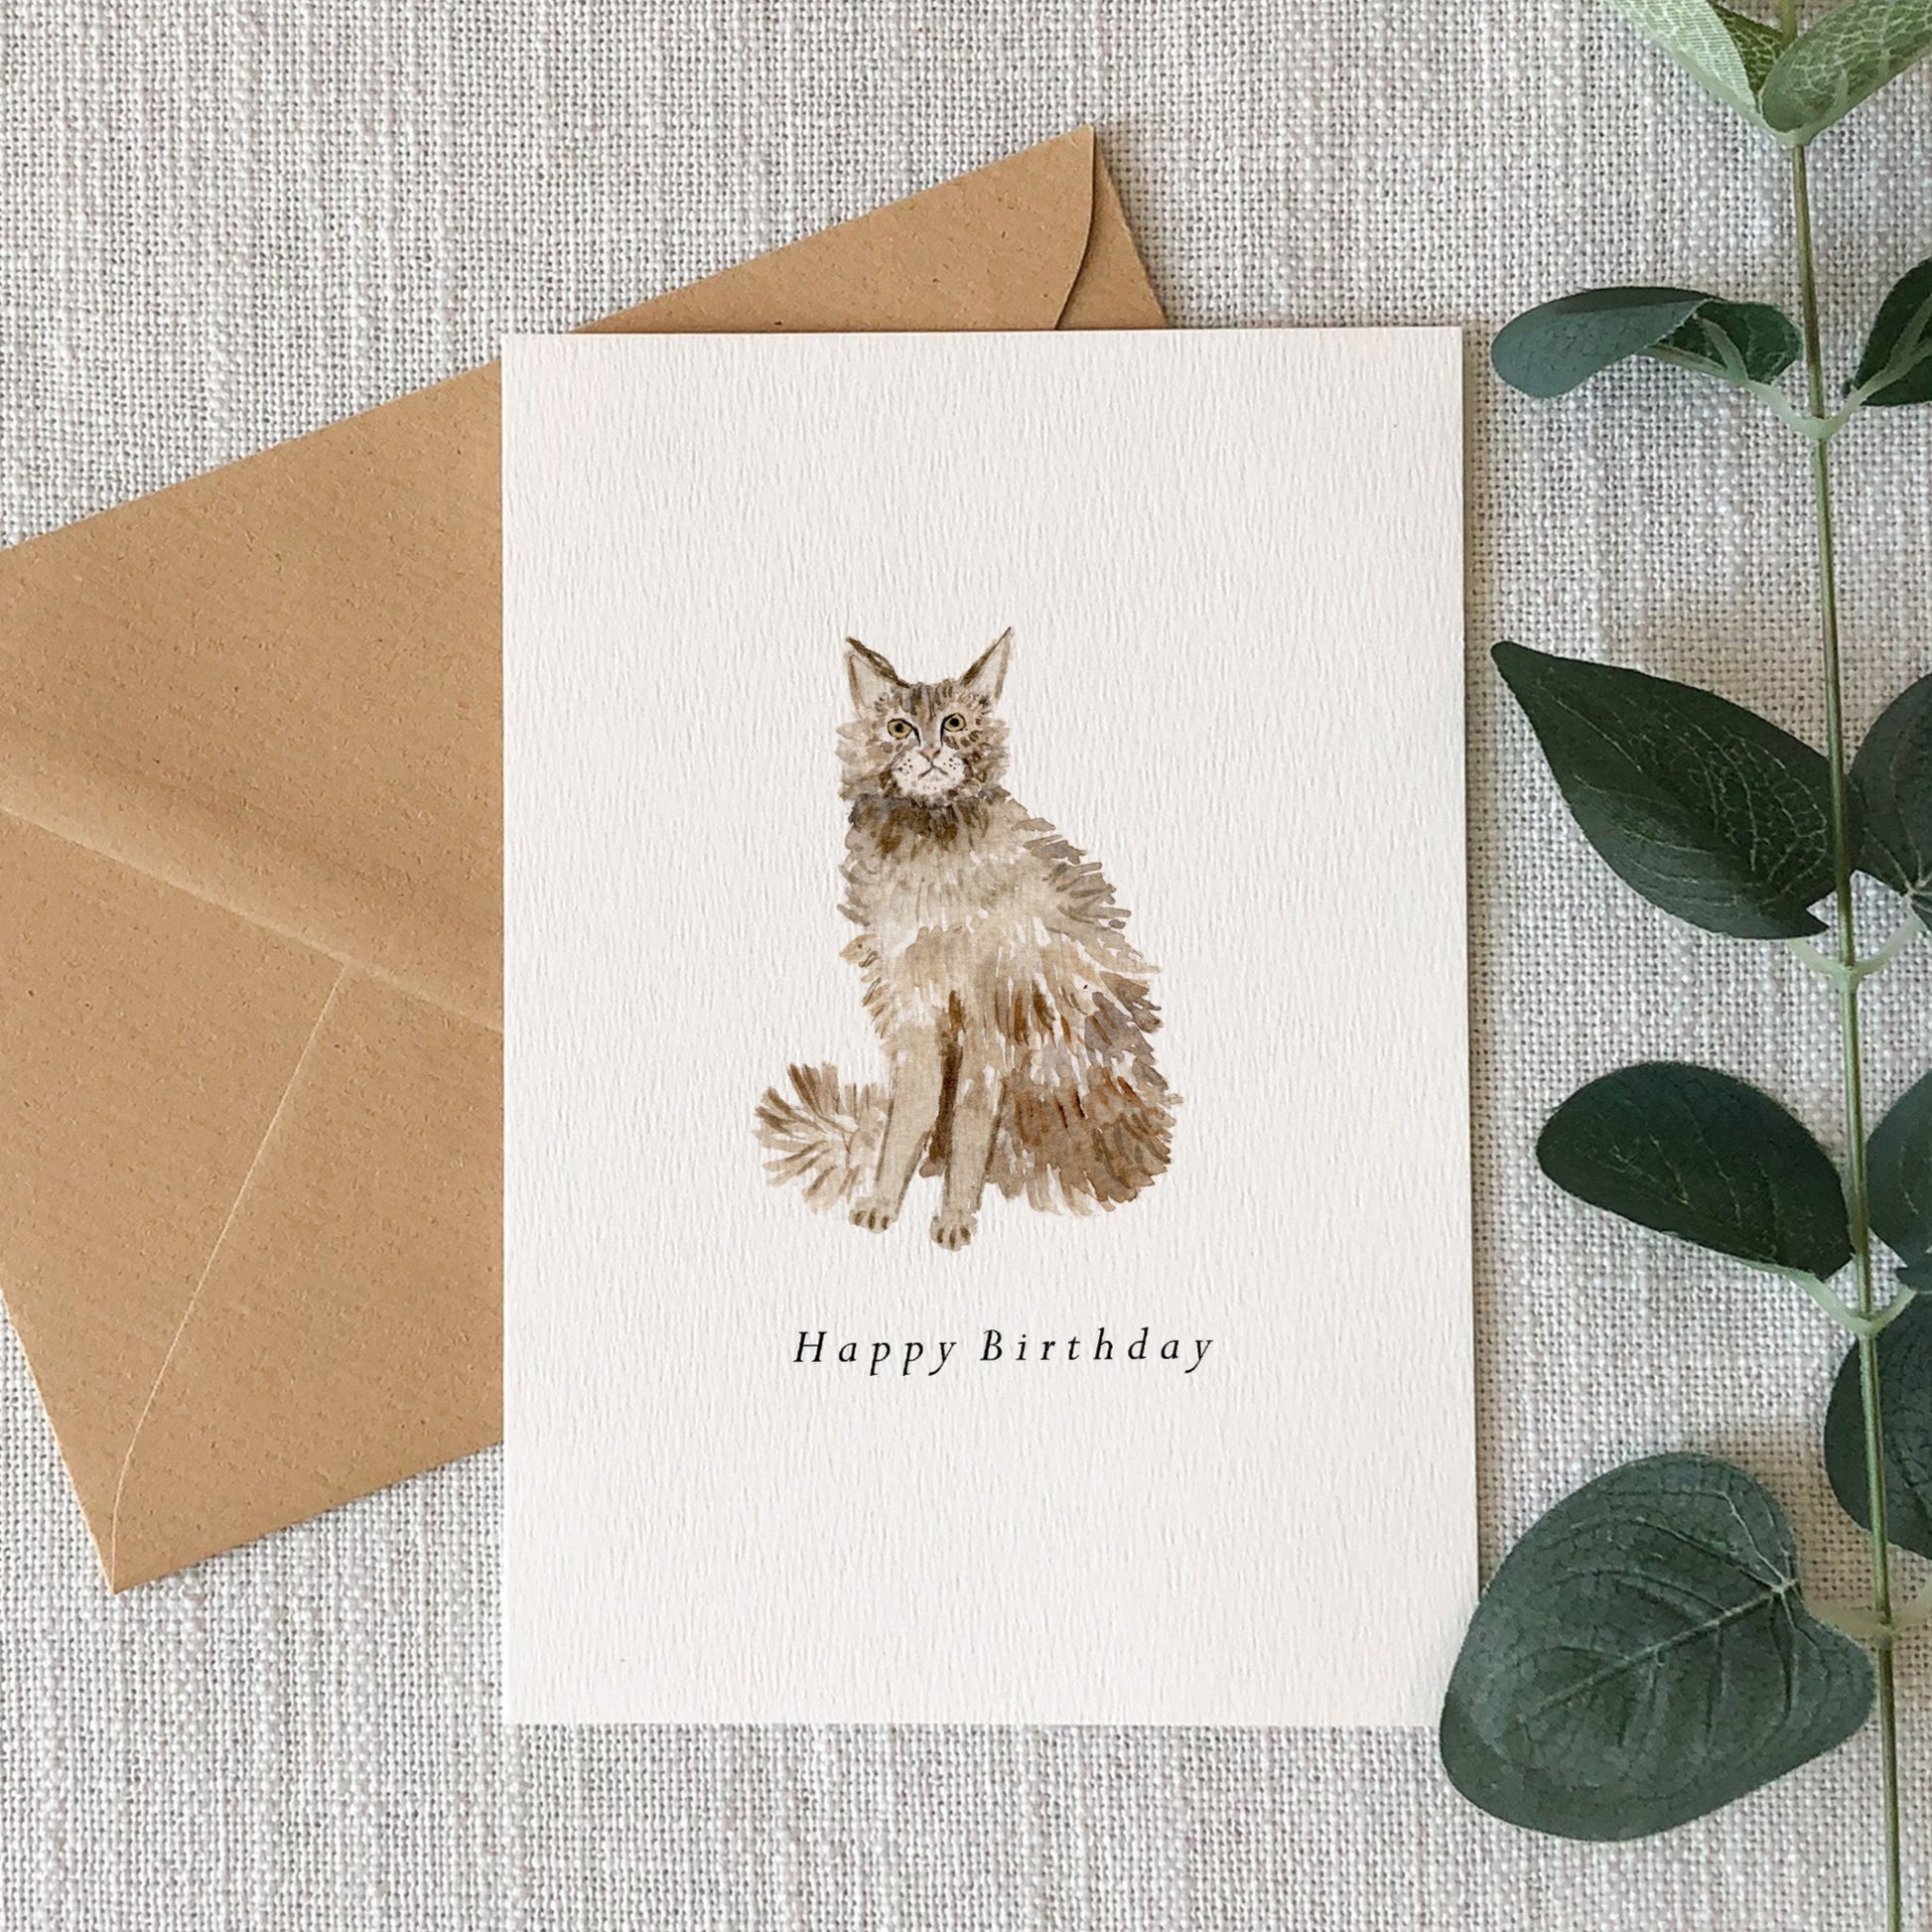 Maine Coon Cat Birthday Card by HeatherLucyJ. Pet Portrait Cat Greeting Card